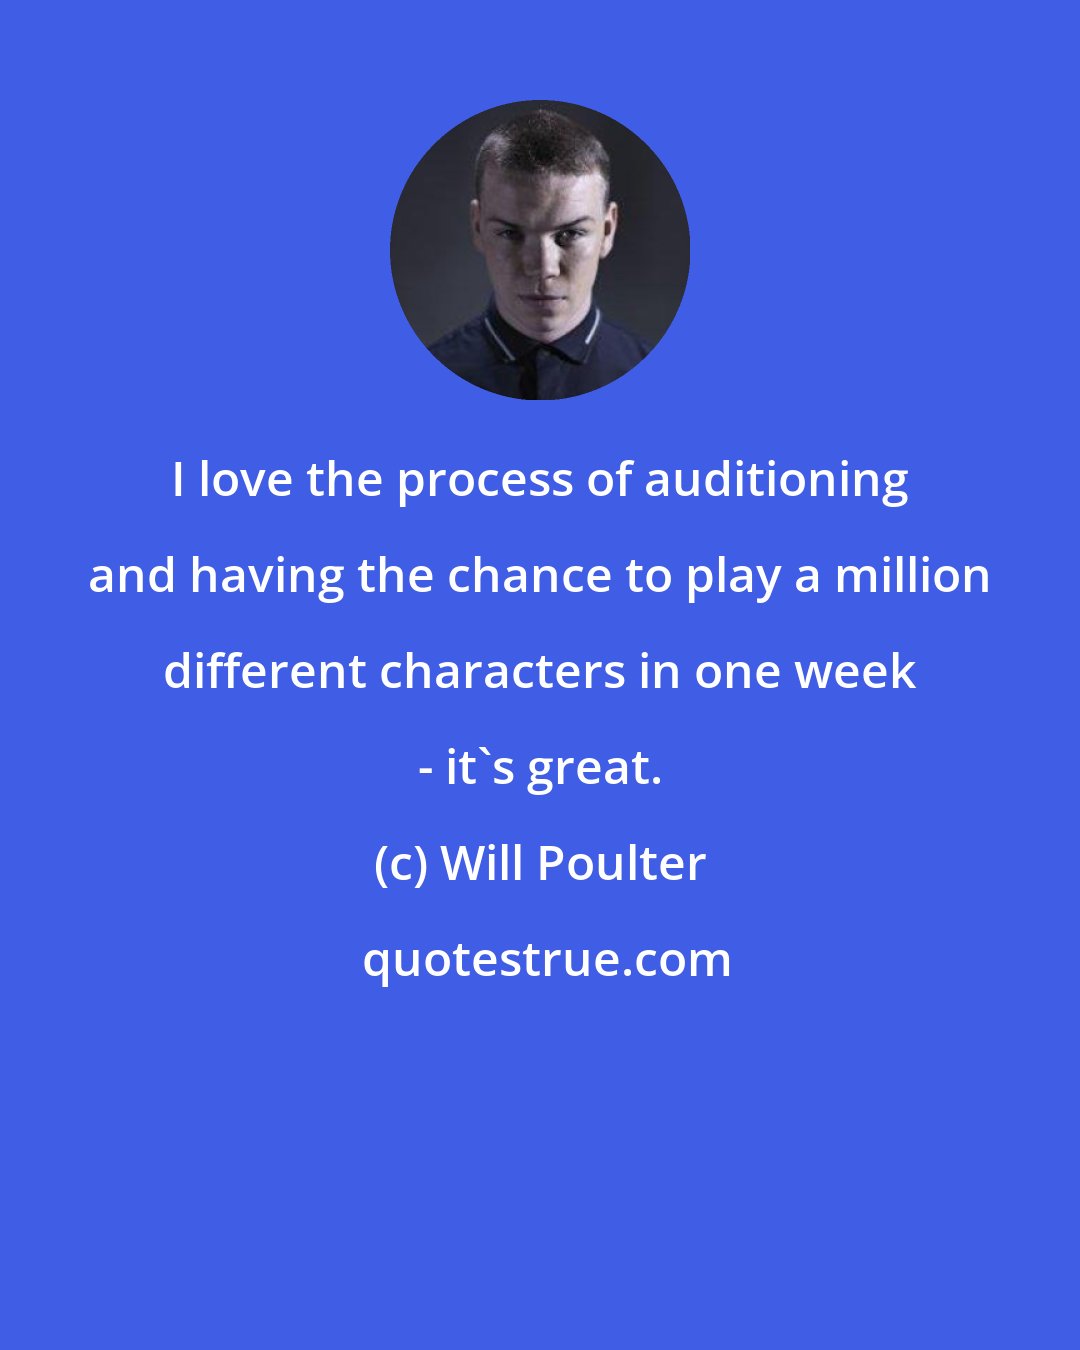 Will Poulter: I love the process of auditioning and having the chance to play a million different characters in one week - it's great.